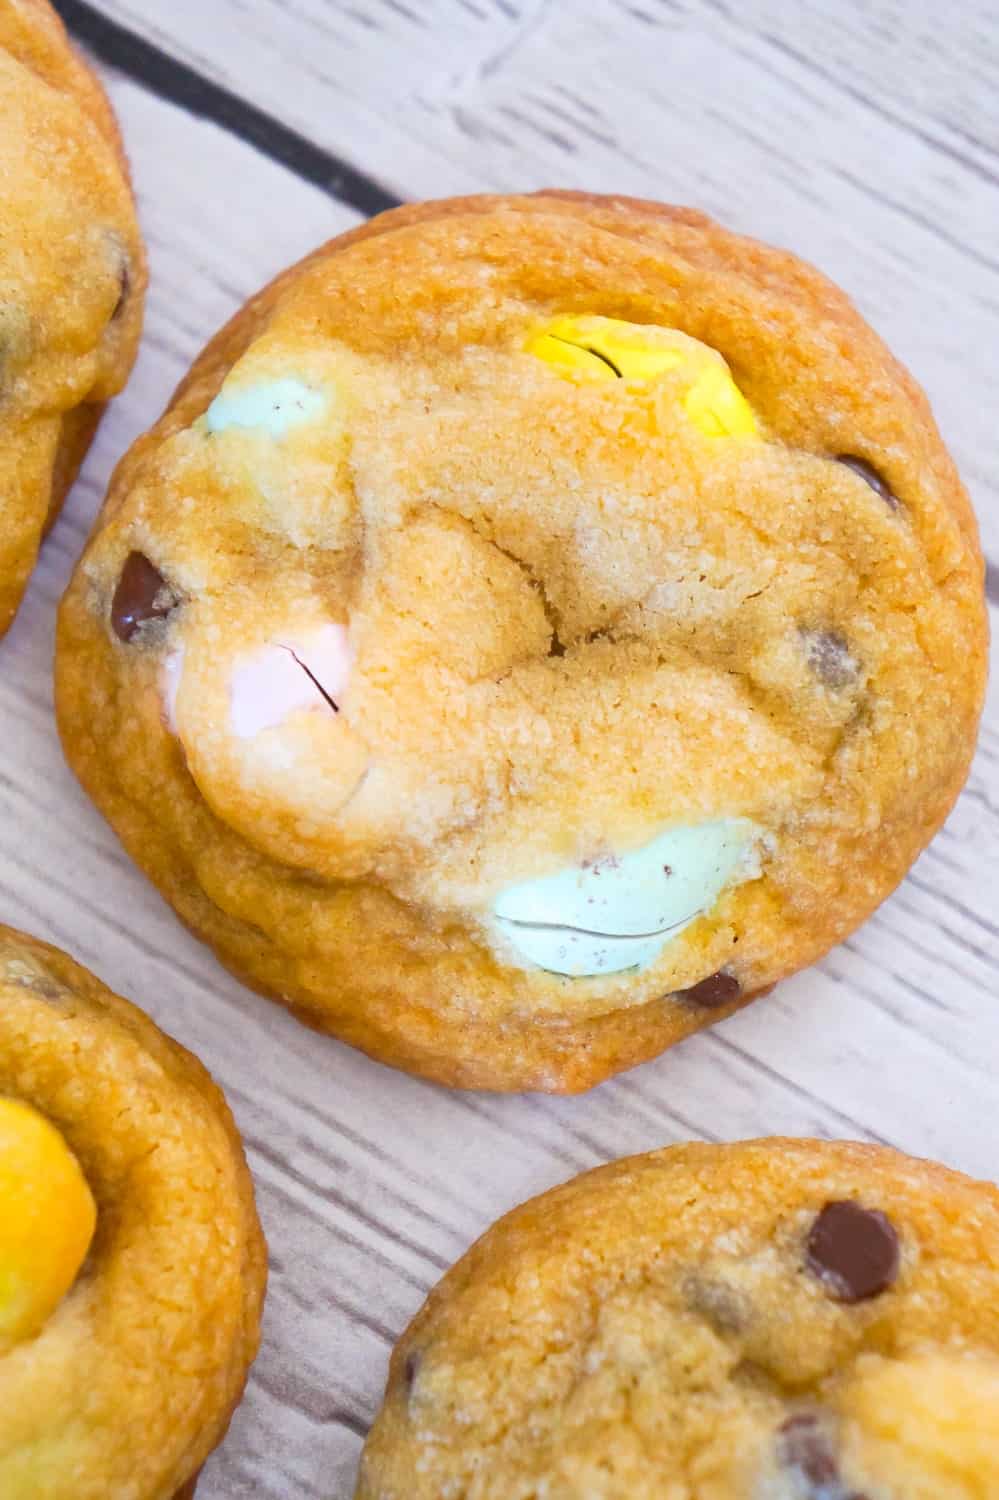 Easter Cookies are delicious chocolate chip cookies loaded with milk chocolate and cookies and cream Hershey's Eggies. These chewy chocolate chip cookies with mini eggs are made with butter flavoured Crisco.